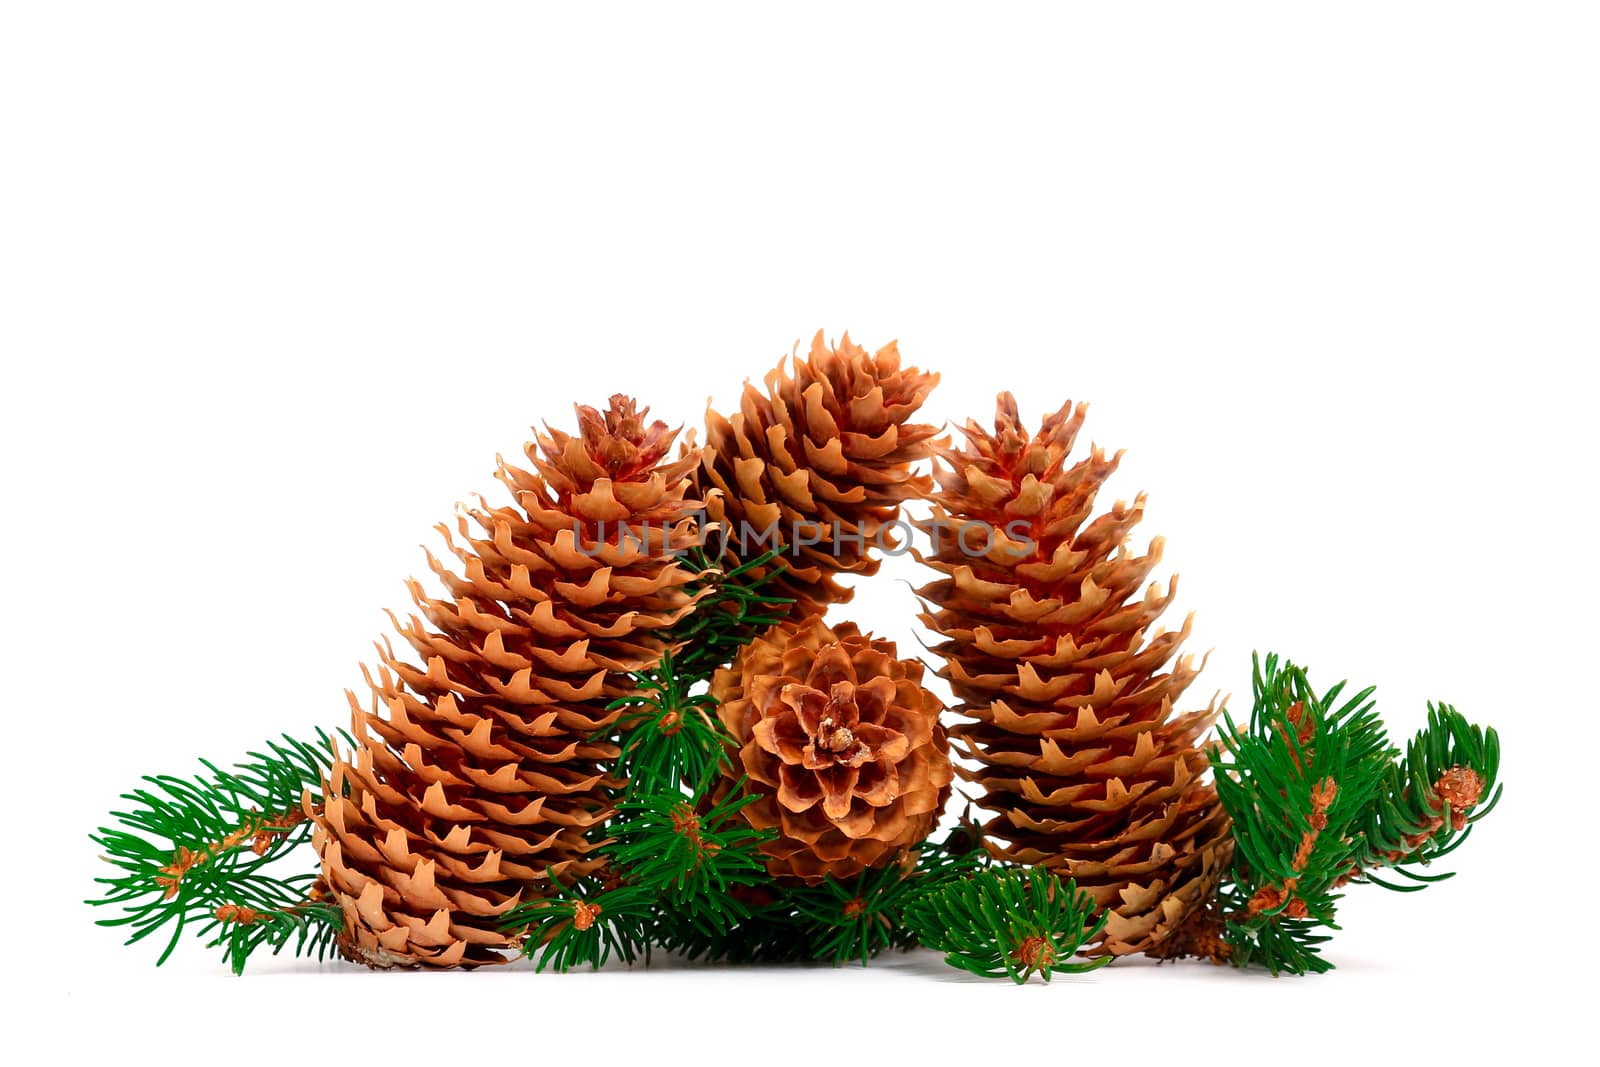 A scenic view of four pine cones with green branches design for Christmas